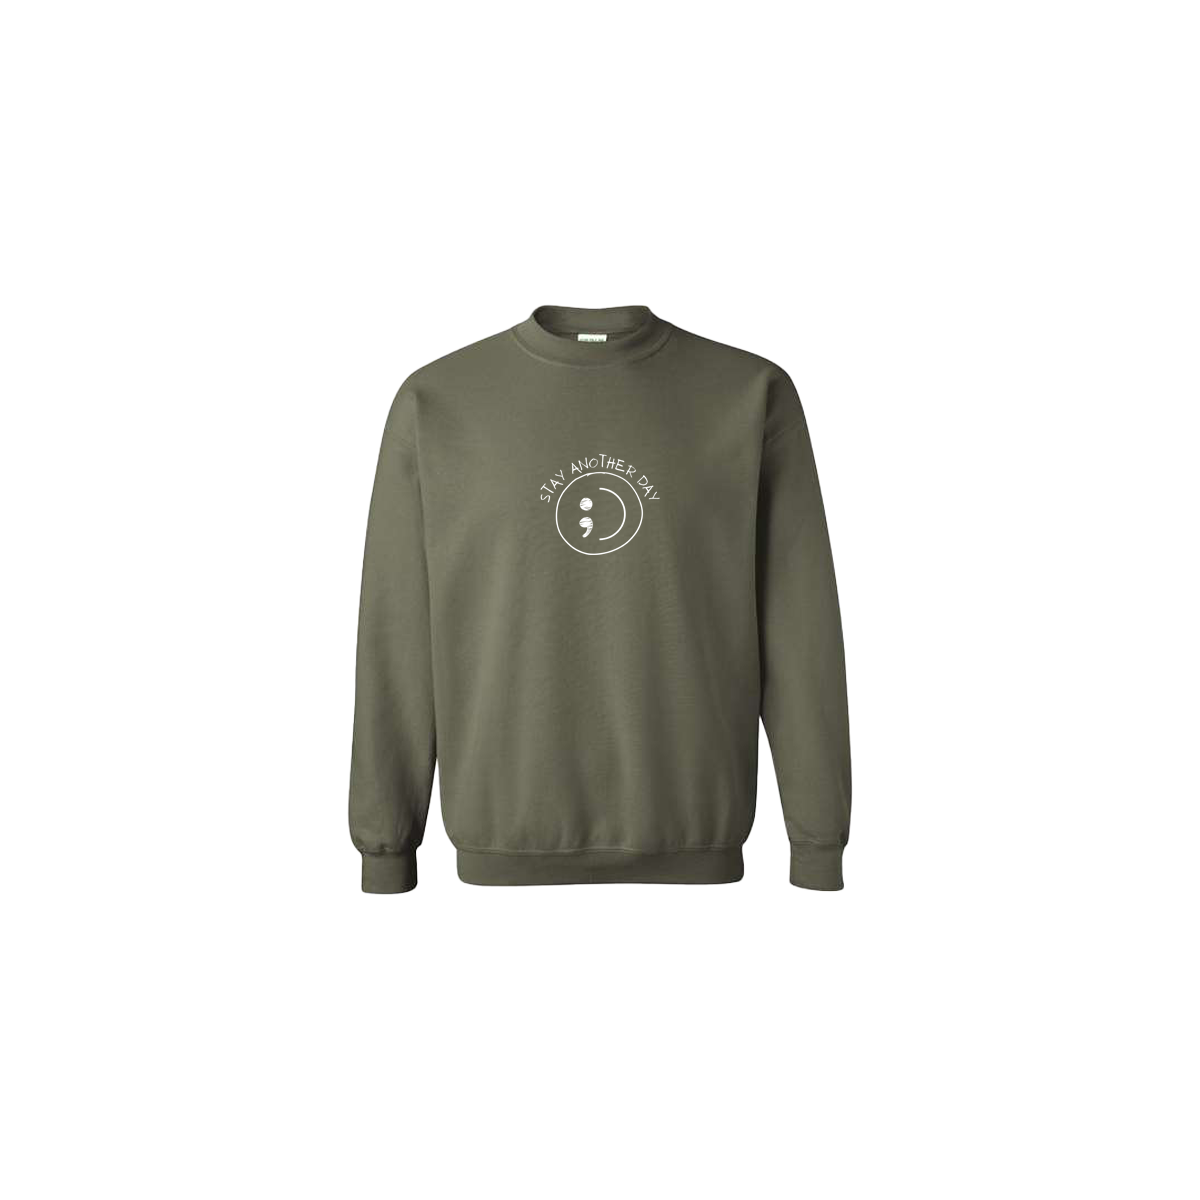 Stay Another Day Smiley Face Embroidered ArmyGreen Crewneck - Mental Health Awareness Clothing